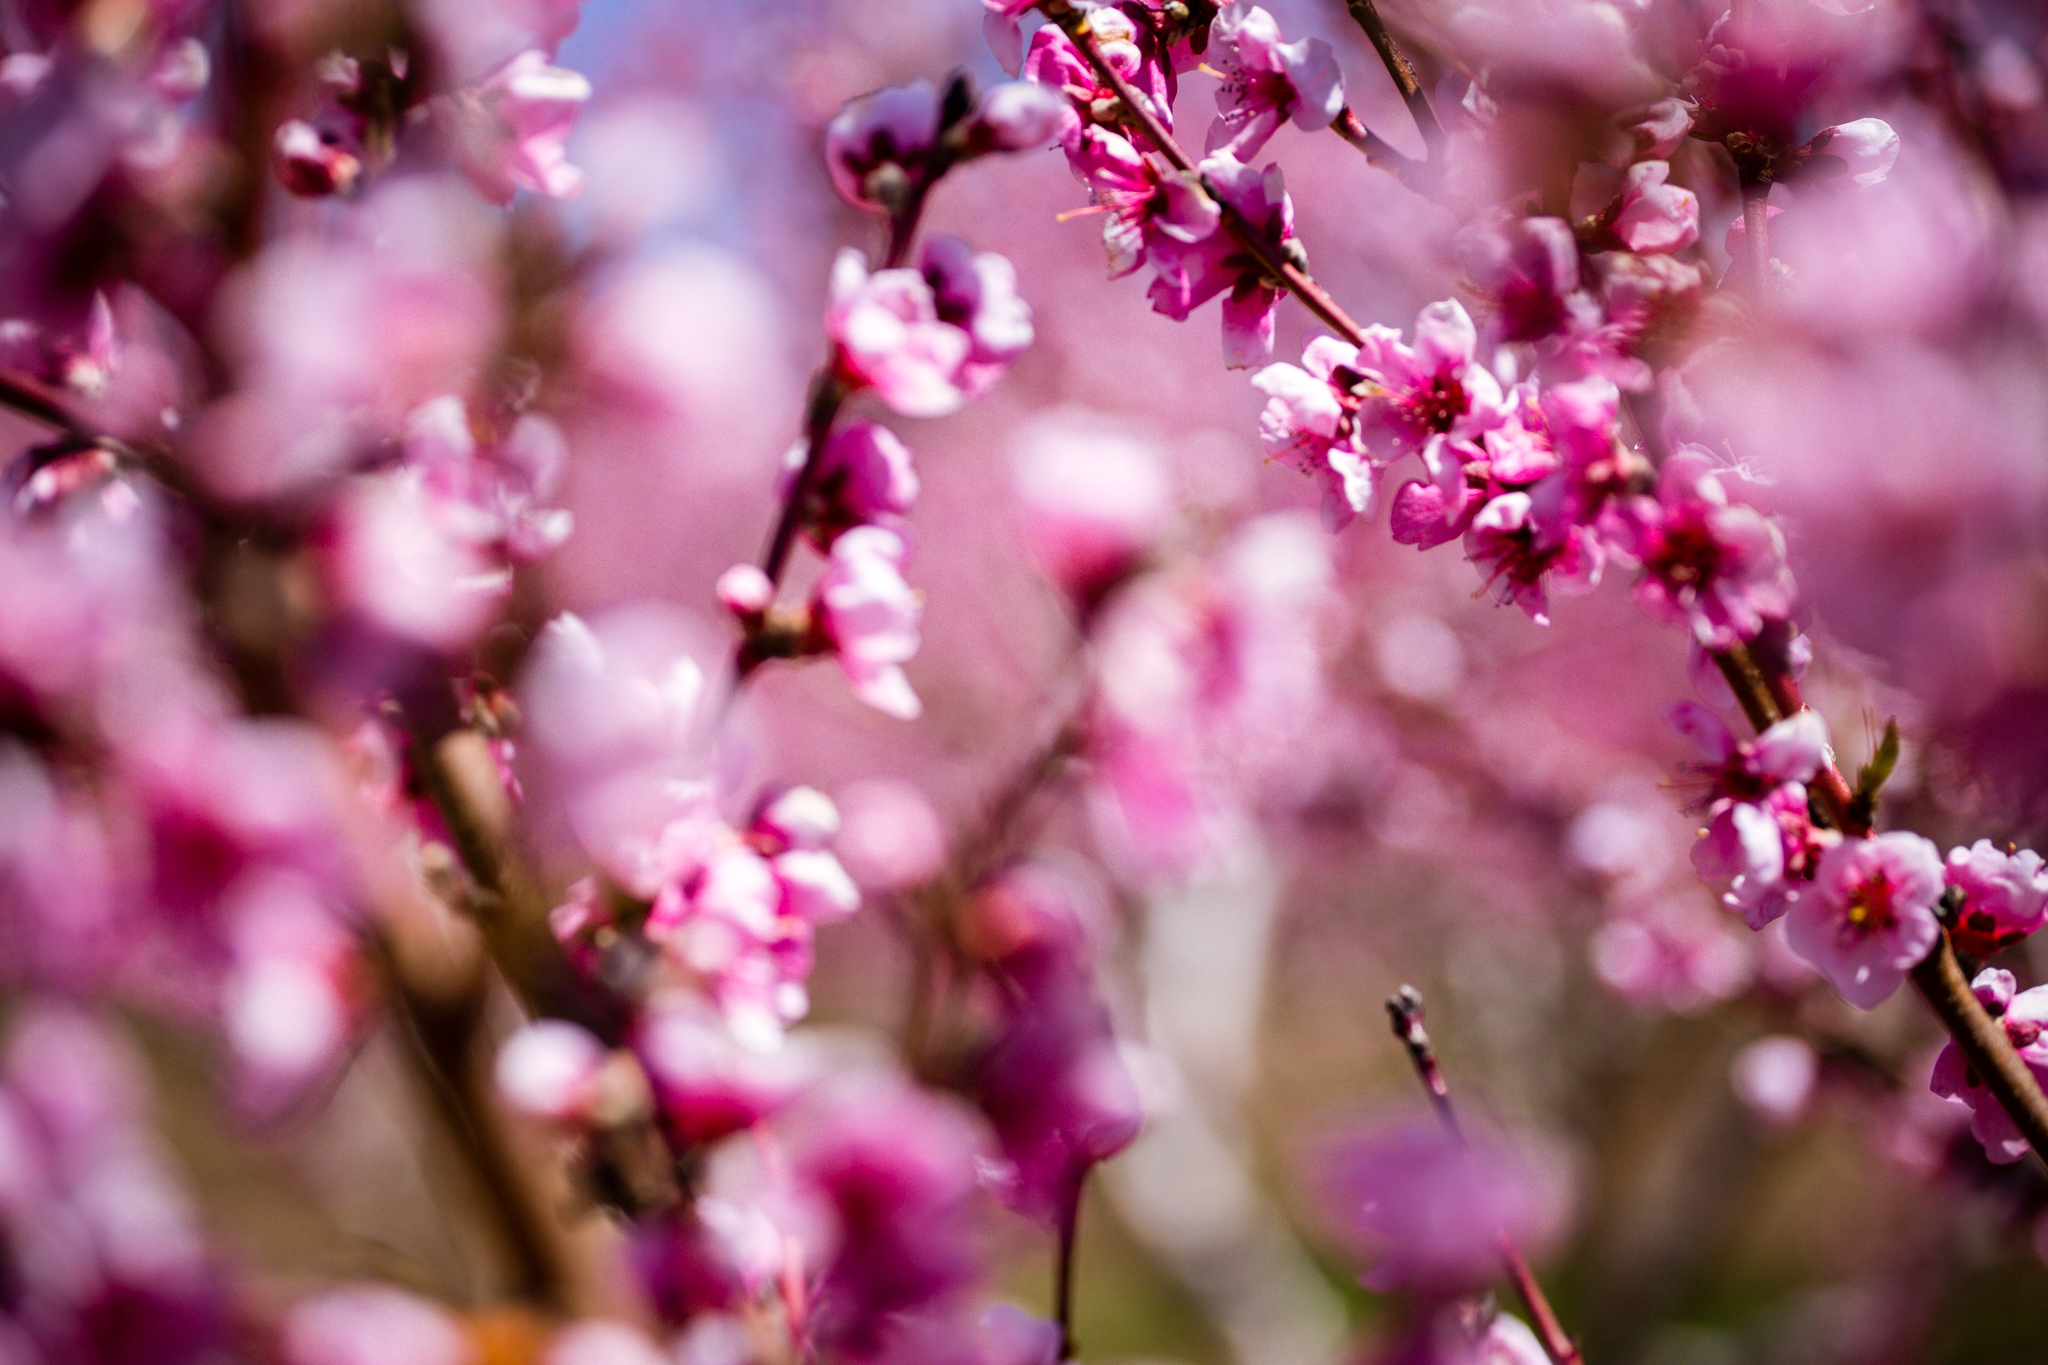 Spring Blossoms - Image Copyright Aaron Beaudoin